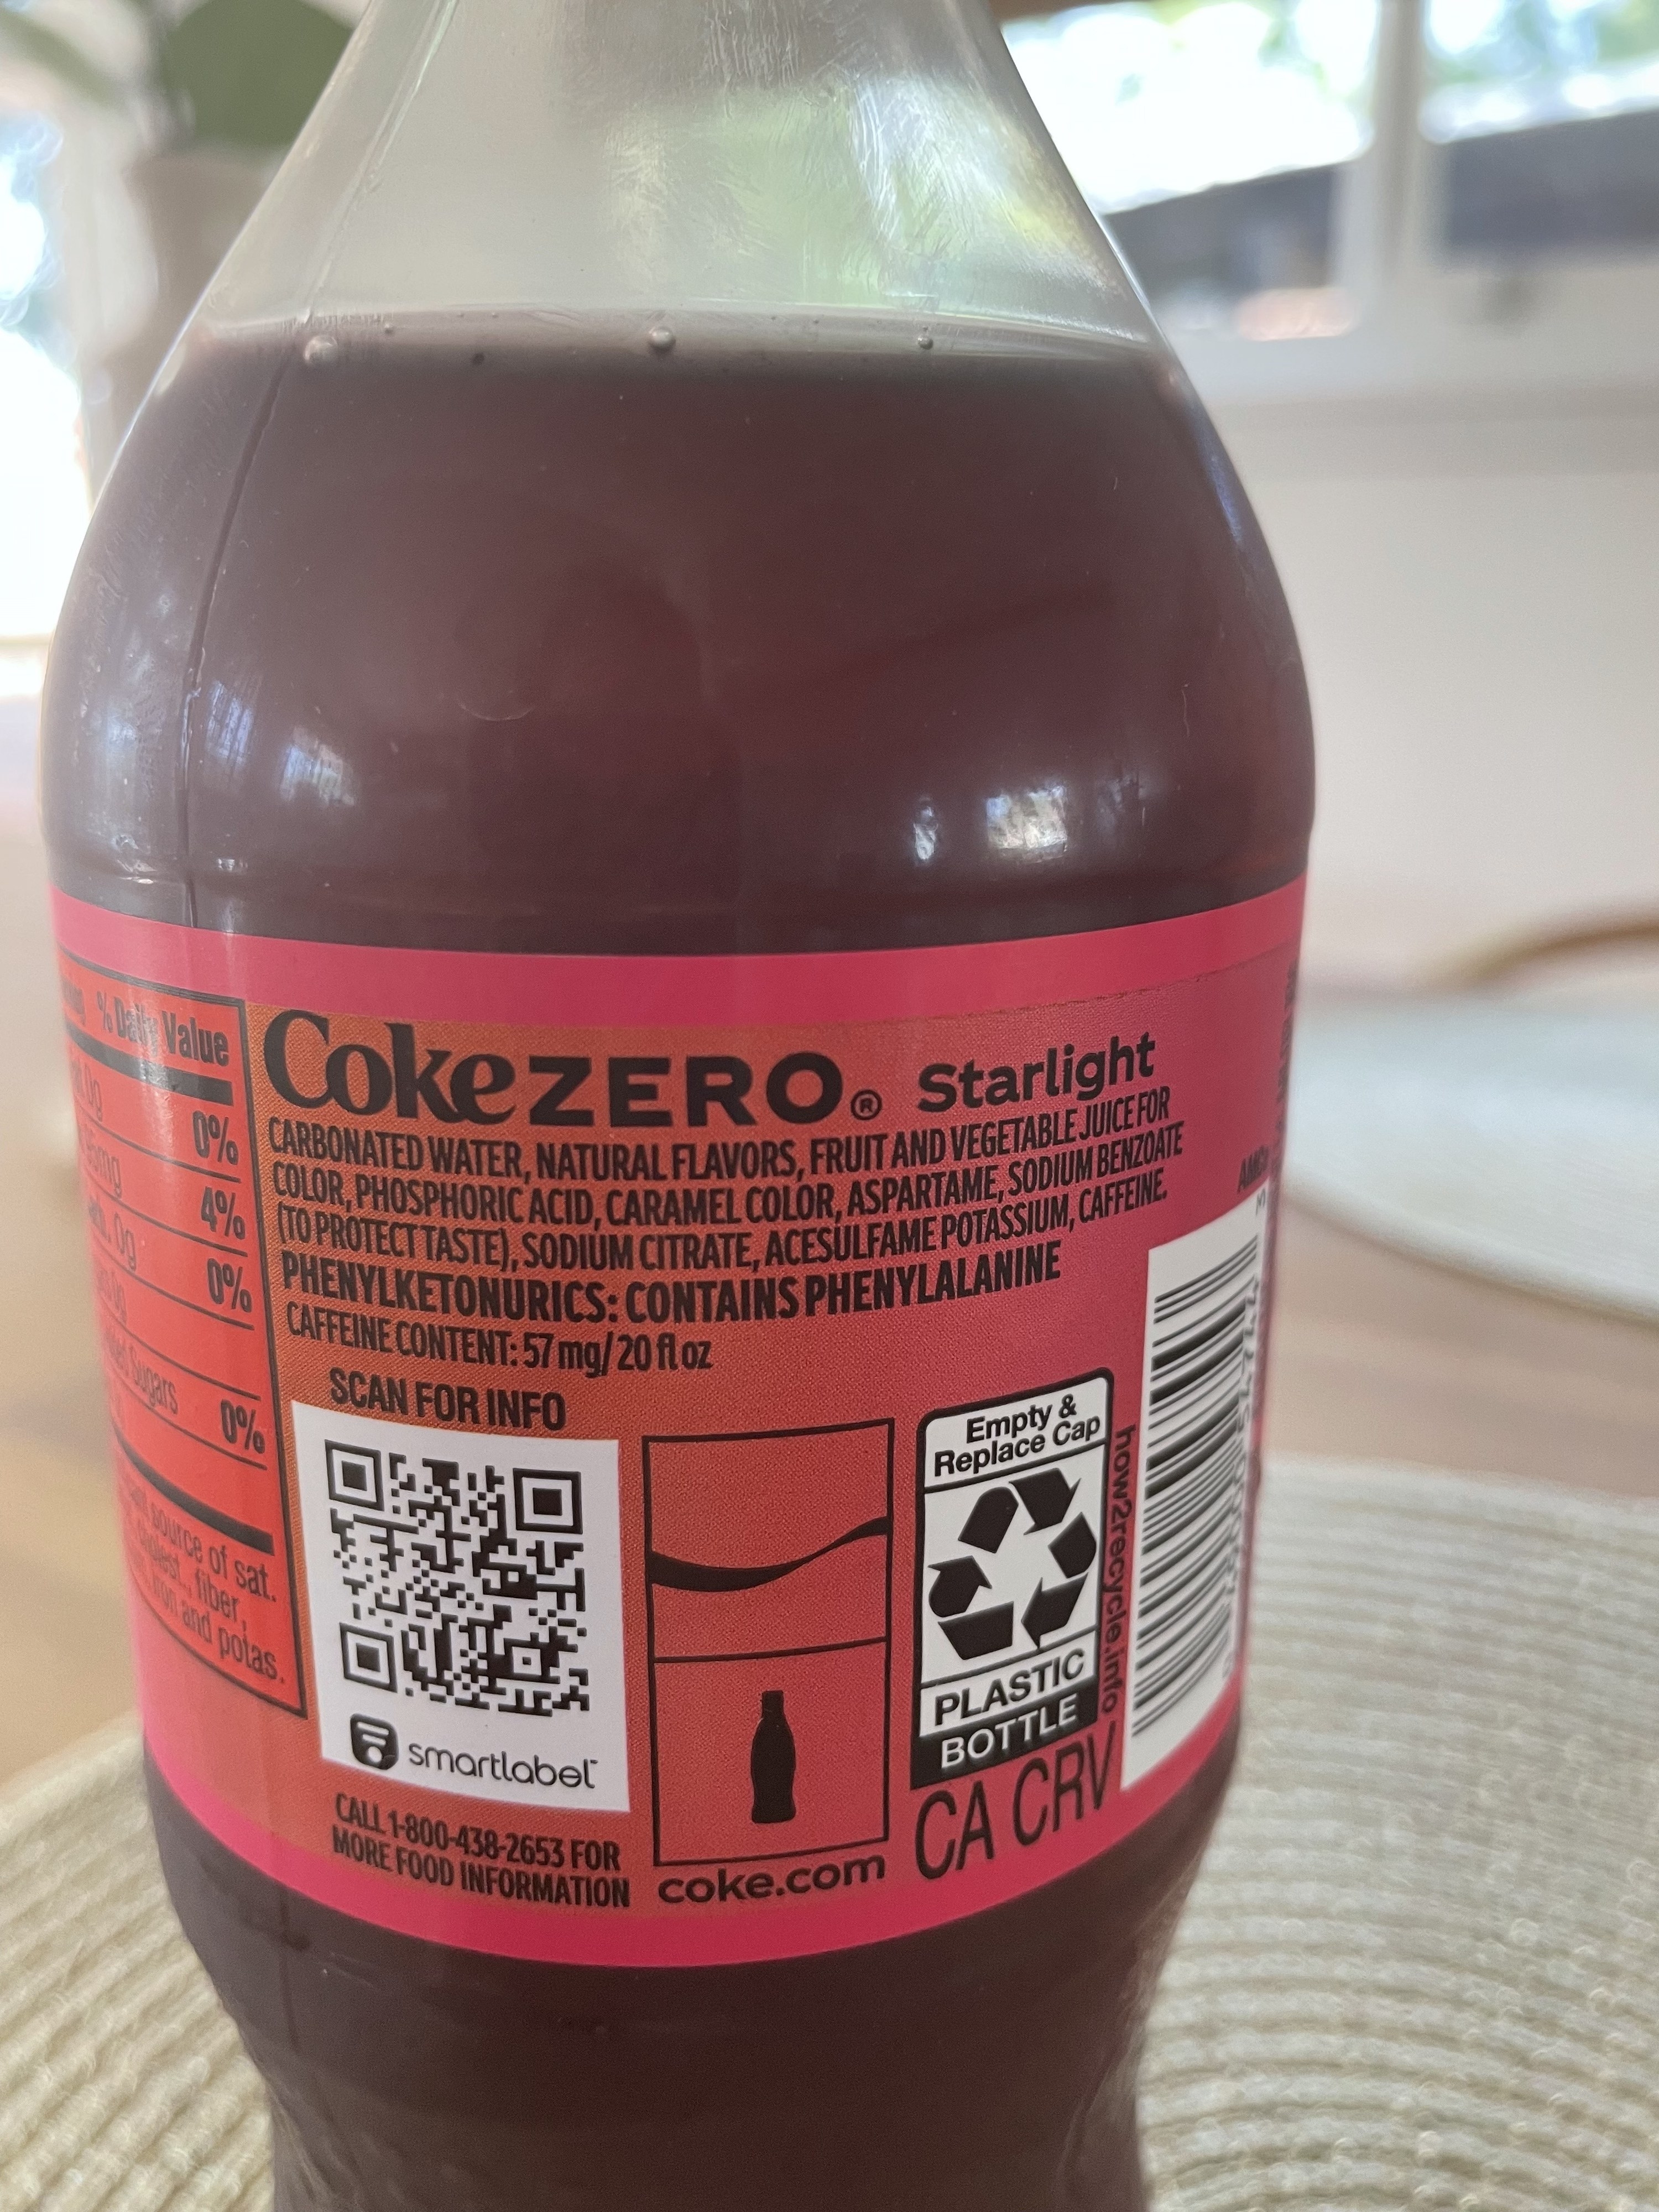 A close-up of the ingredients list, which is about the same as regular Coke Zero except for the fruit and vegetable juice